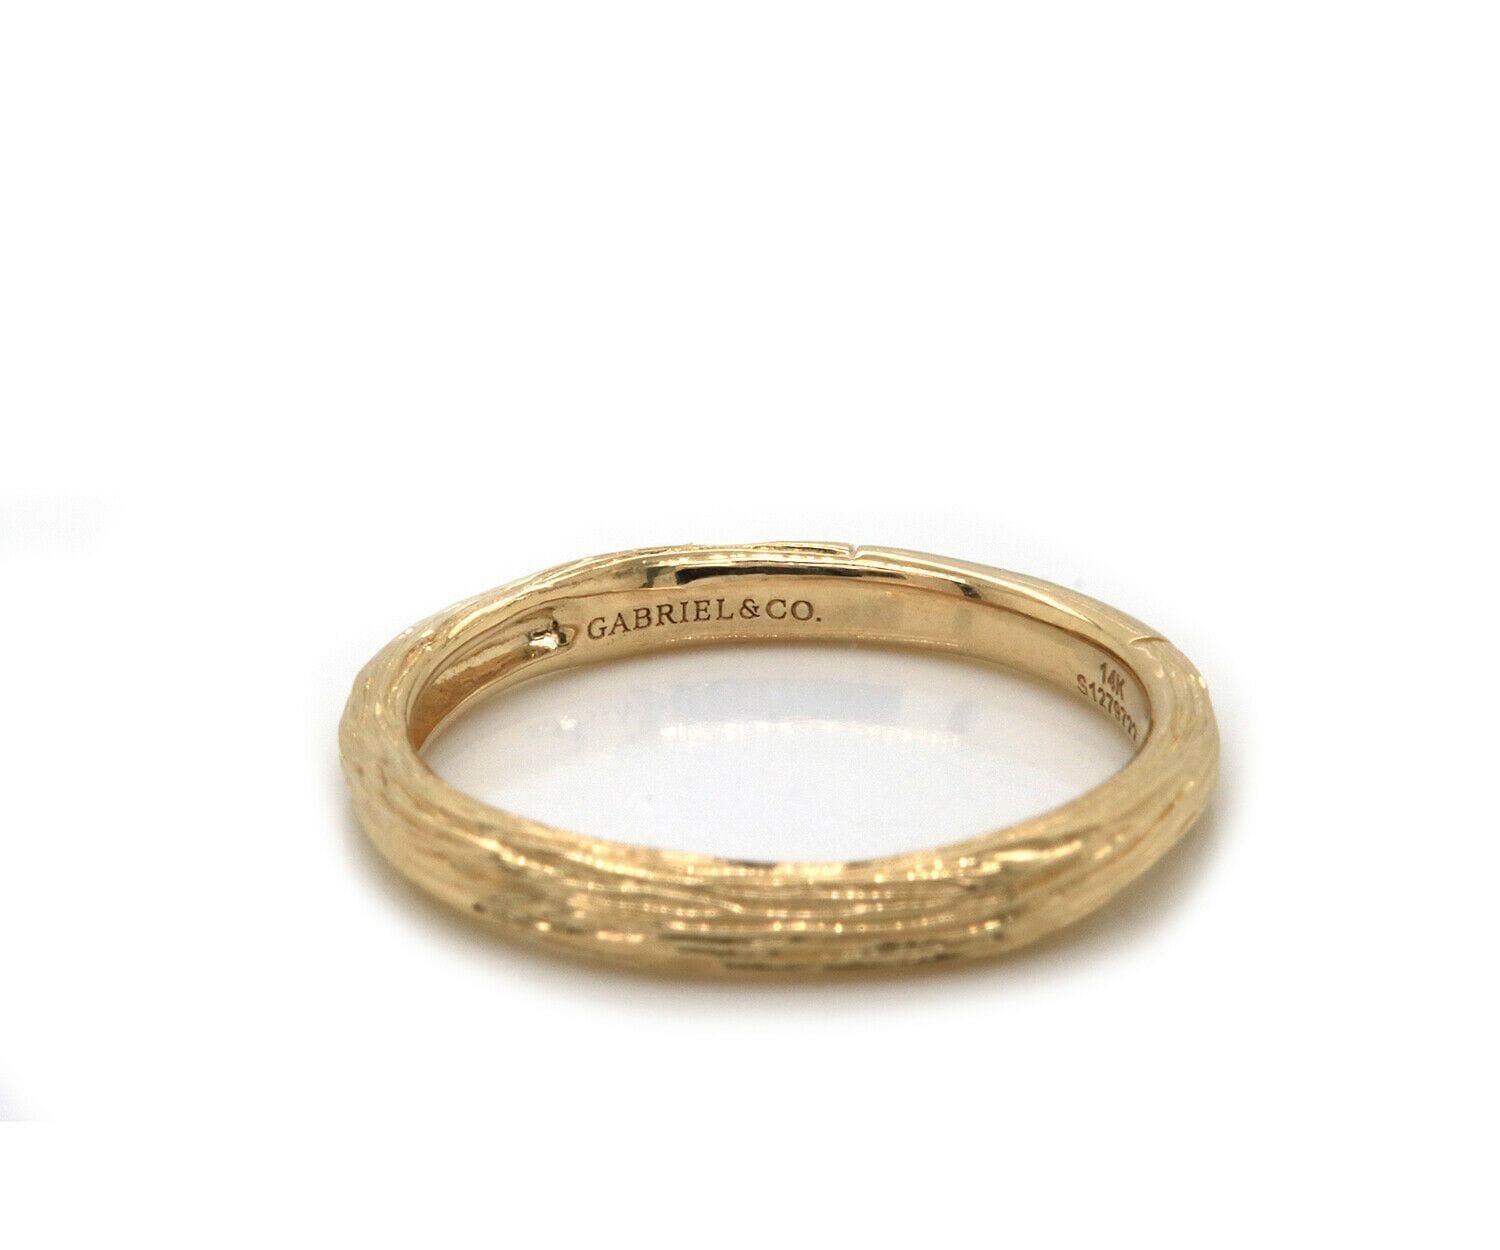 New Gabriel & Co. Textured Band Ring in 14K Yellow Gold In New Condition For Sale In Vienna, VA